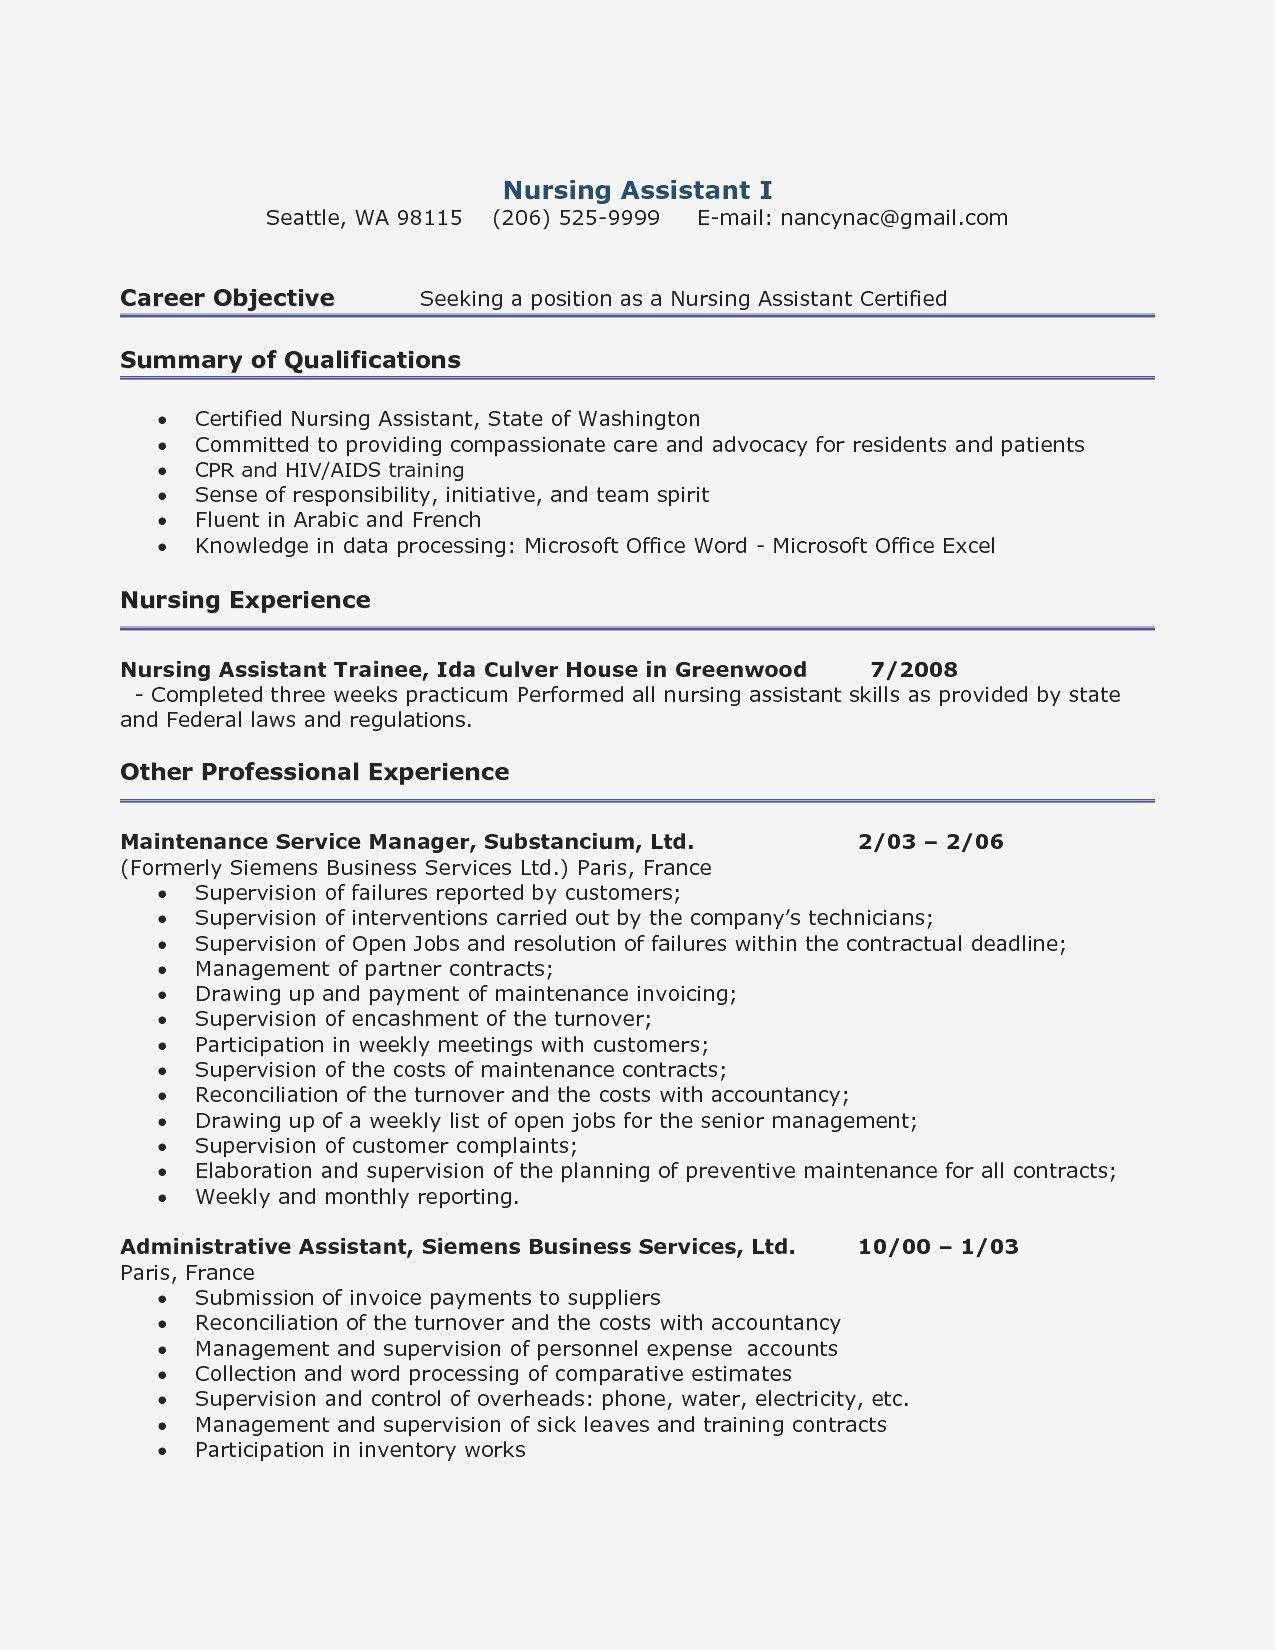 Sample Resume for Cna with Previous Experience Resume Free Cover Letter for Resume, Resume Skills, Teacher …